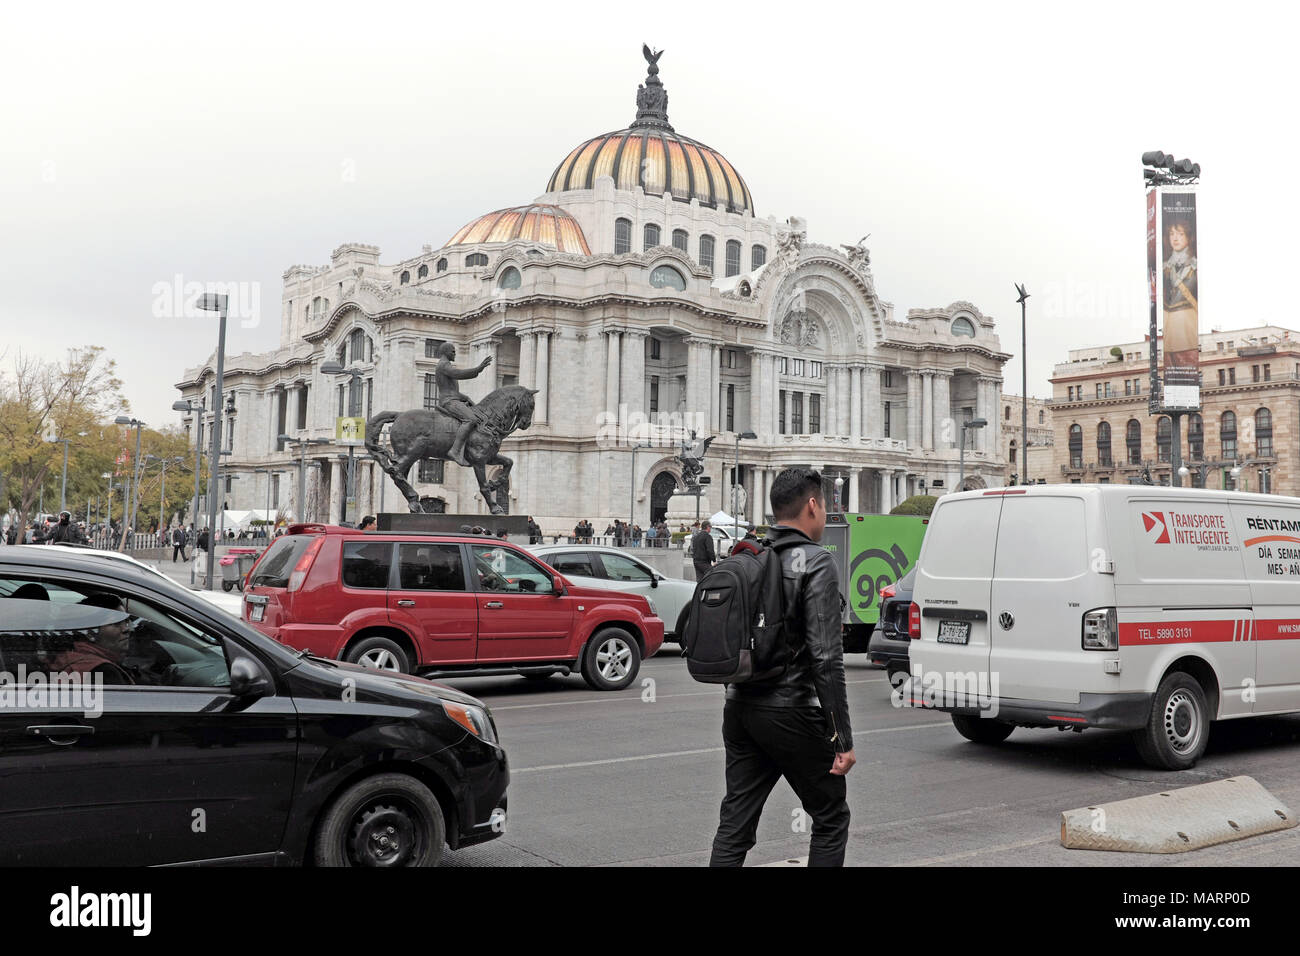 A man walks with traffic in the historic center of Mexico City, Mexico, passing by the palatial Palacio de Bellas Artes. Stock Photo